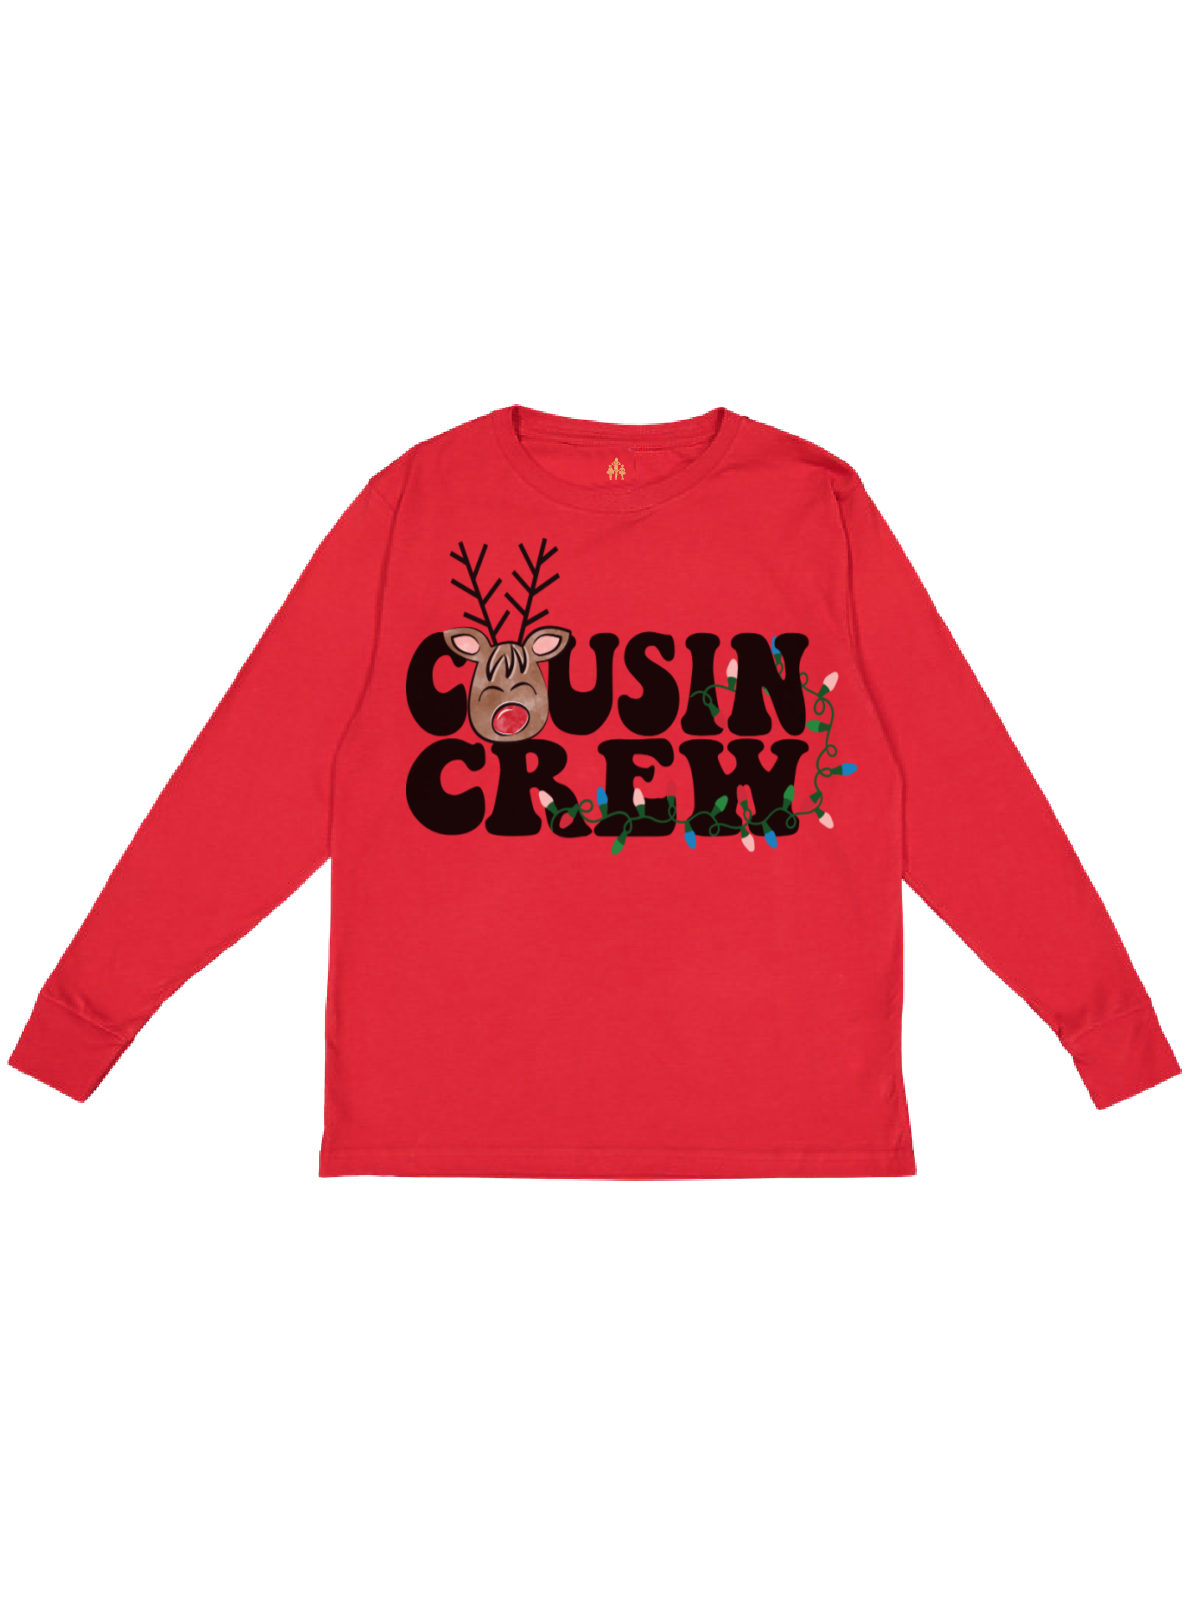 Cousin crew Kids Red Reindeer Shirt Long Sleeve Style